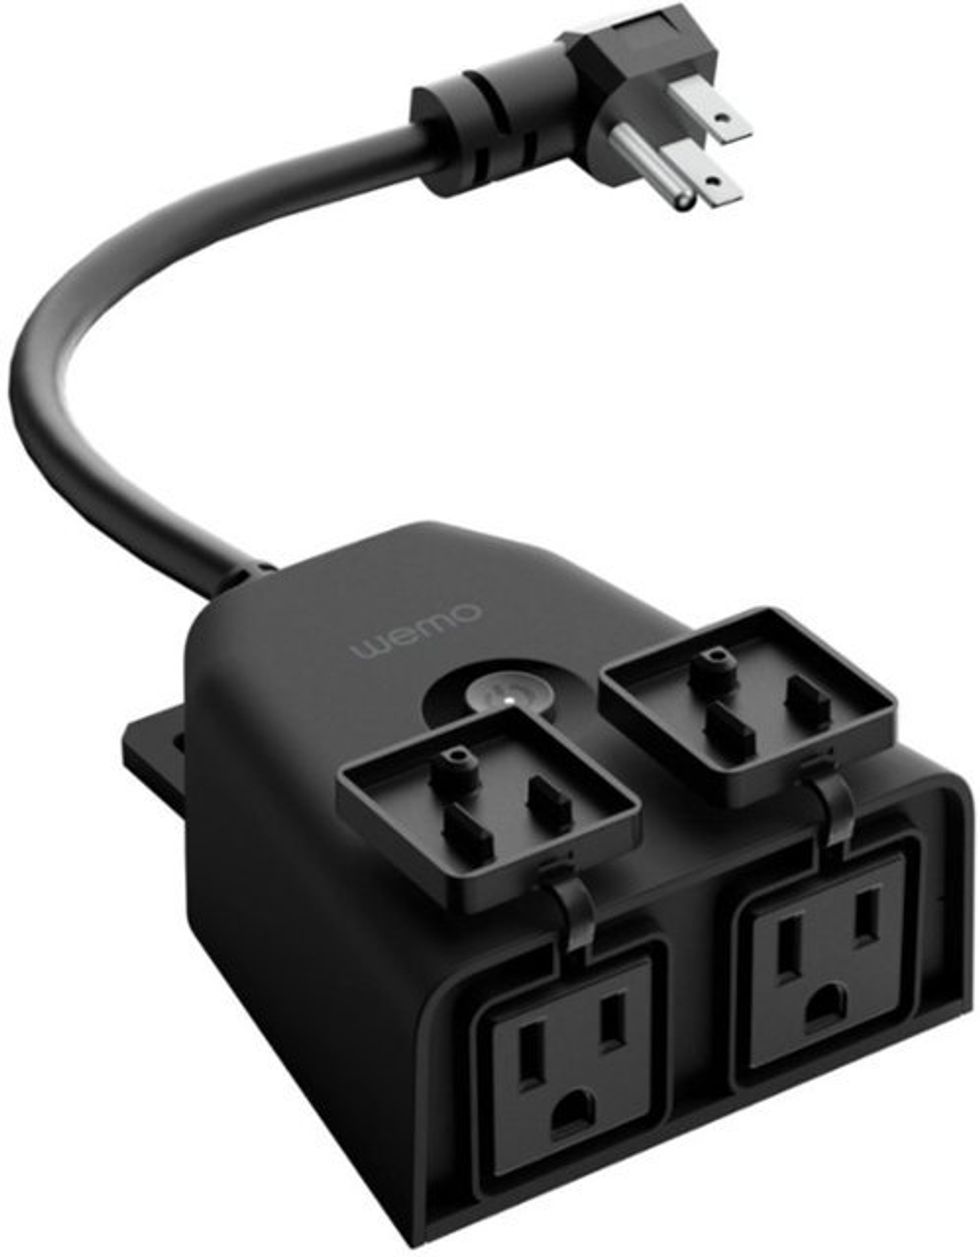 a product shot of Wemo outdoor plug